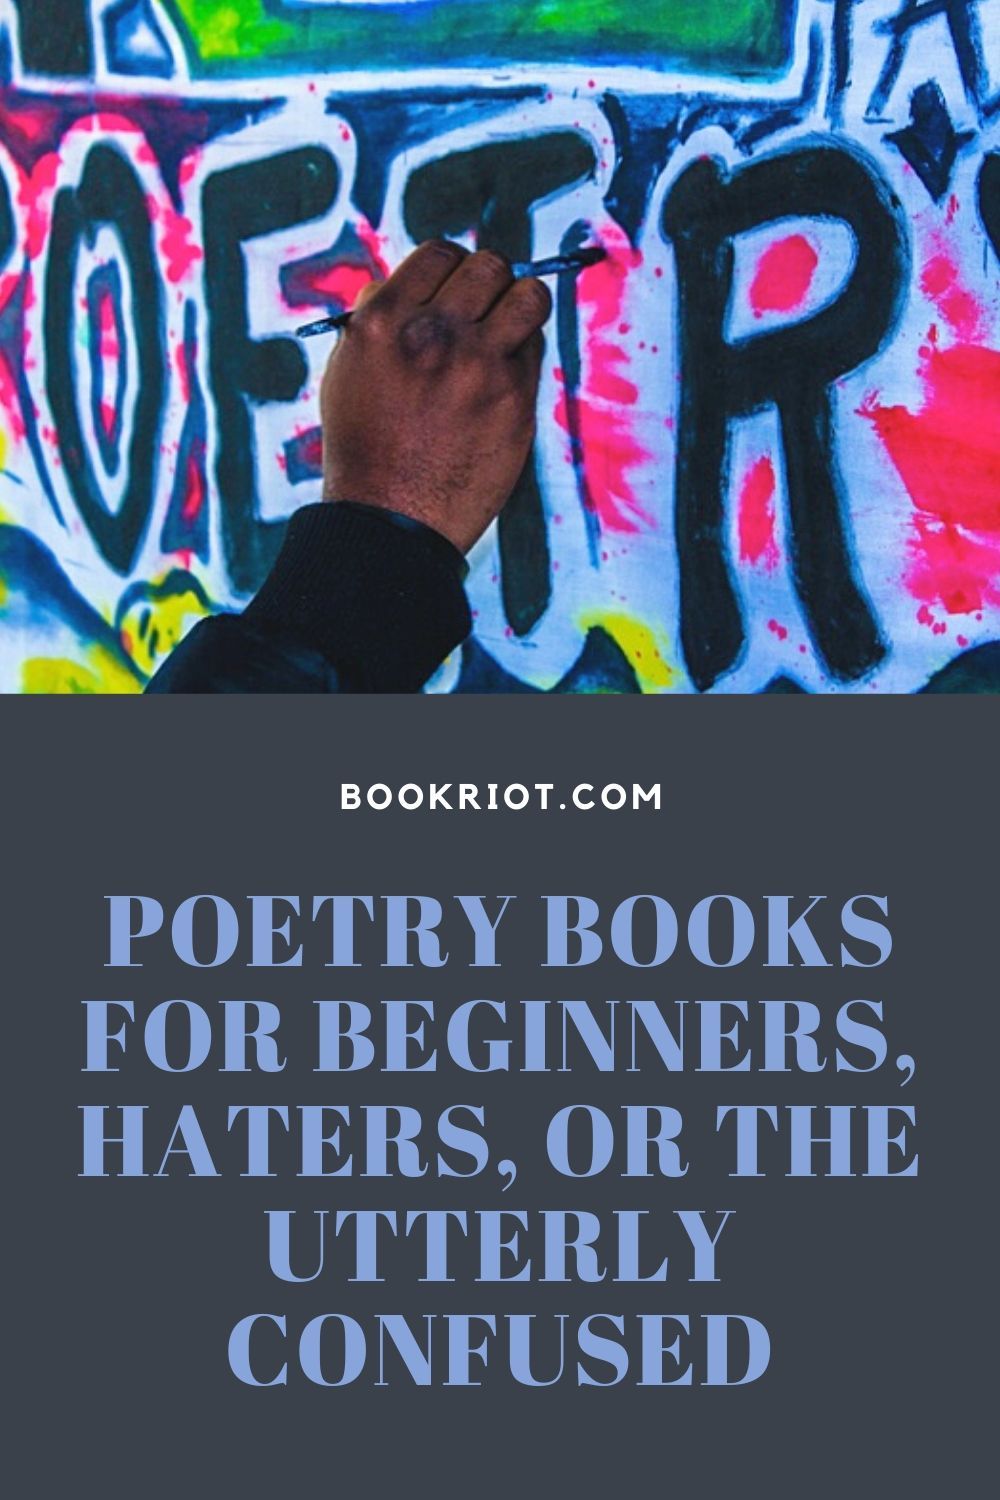 Poetry Books for Beginners, Haters, or the Utterly Confused